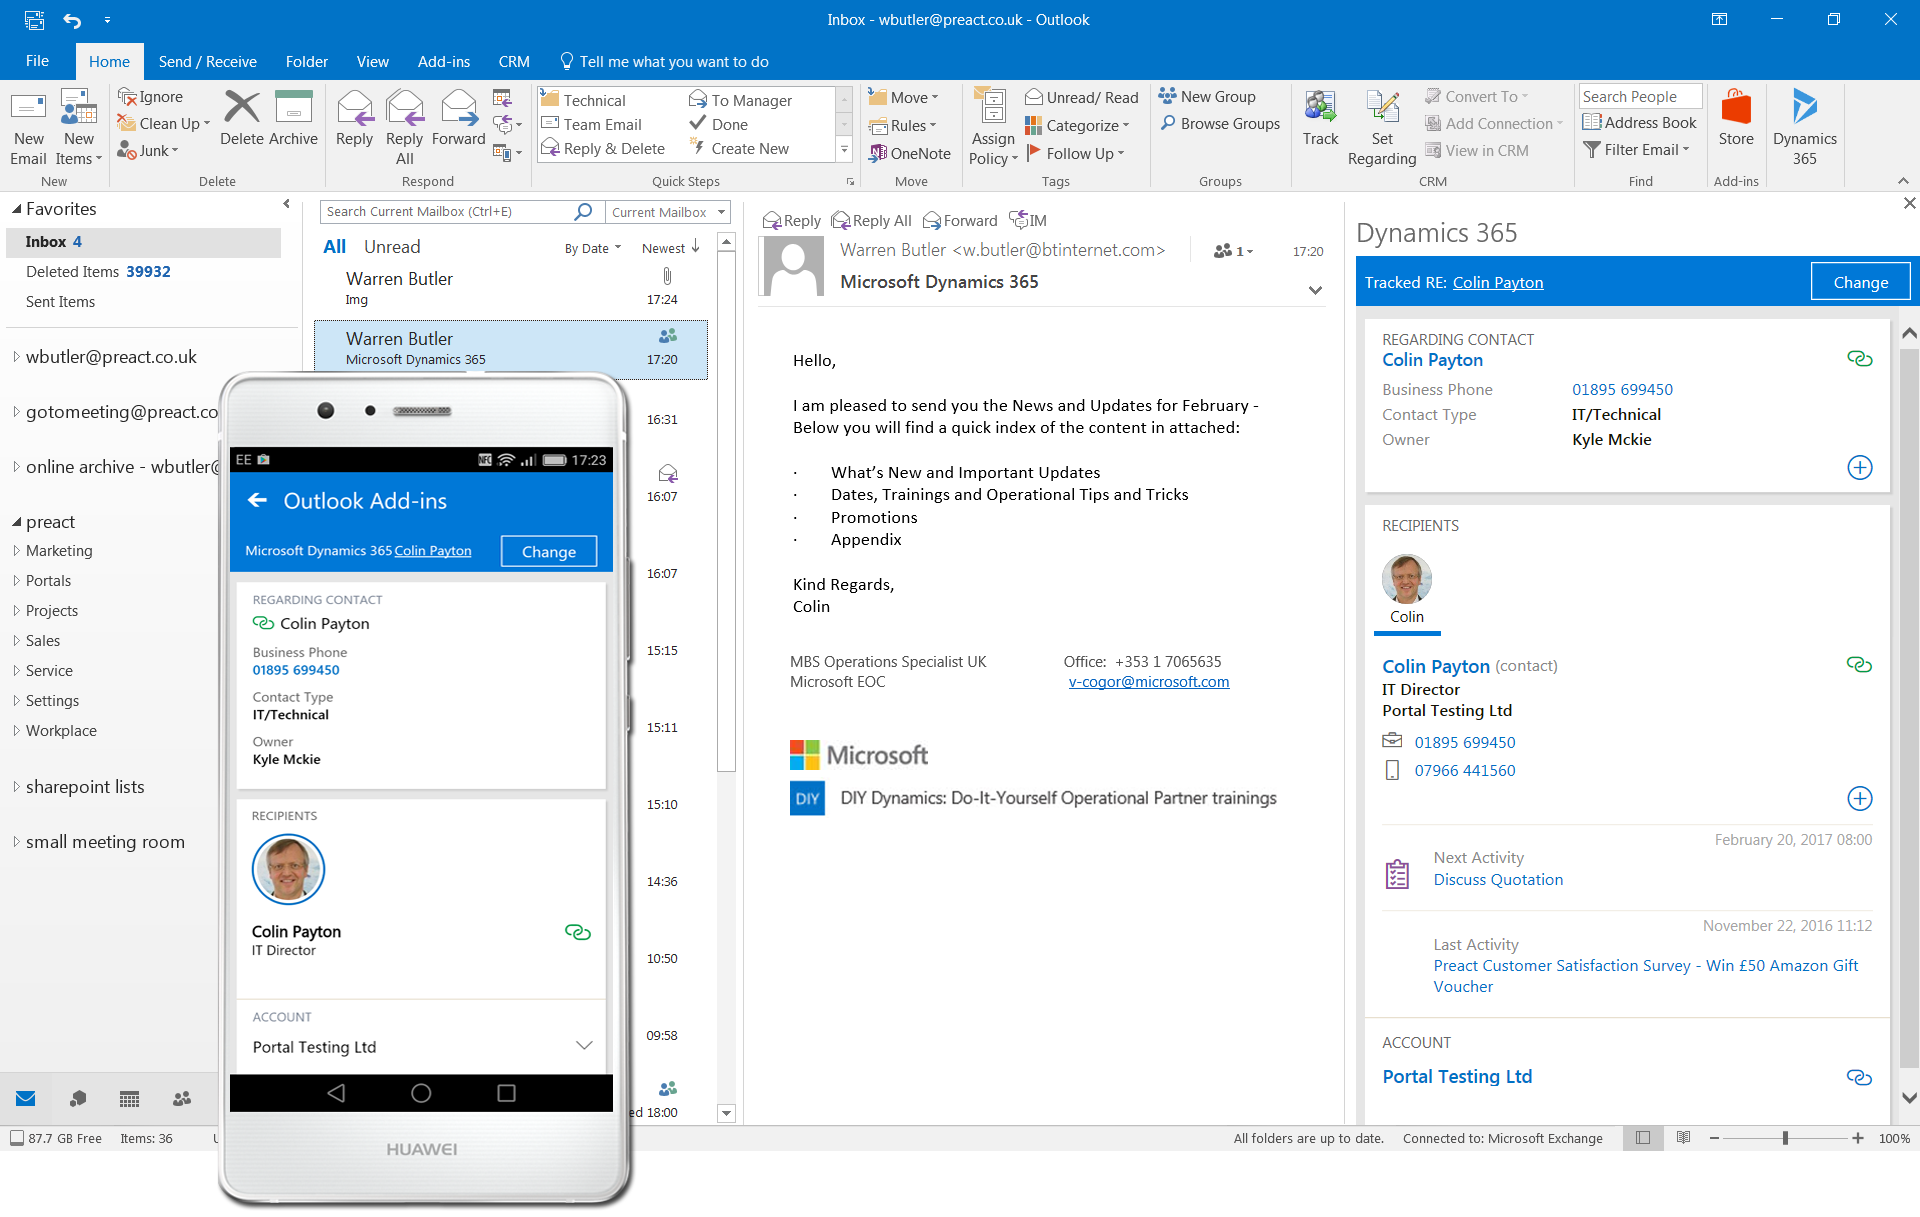 Integrate Microsoft Dynamics 365 with Microsoft Outlook